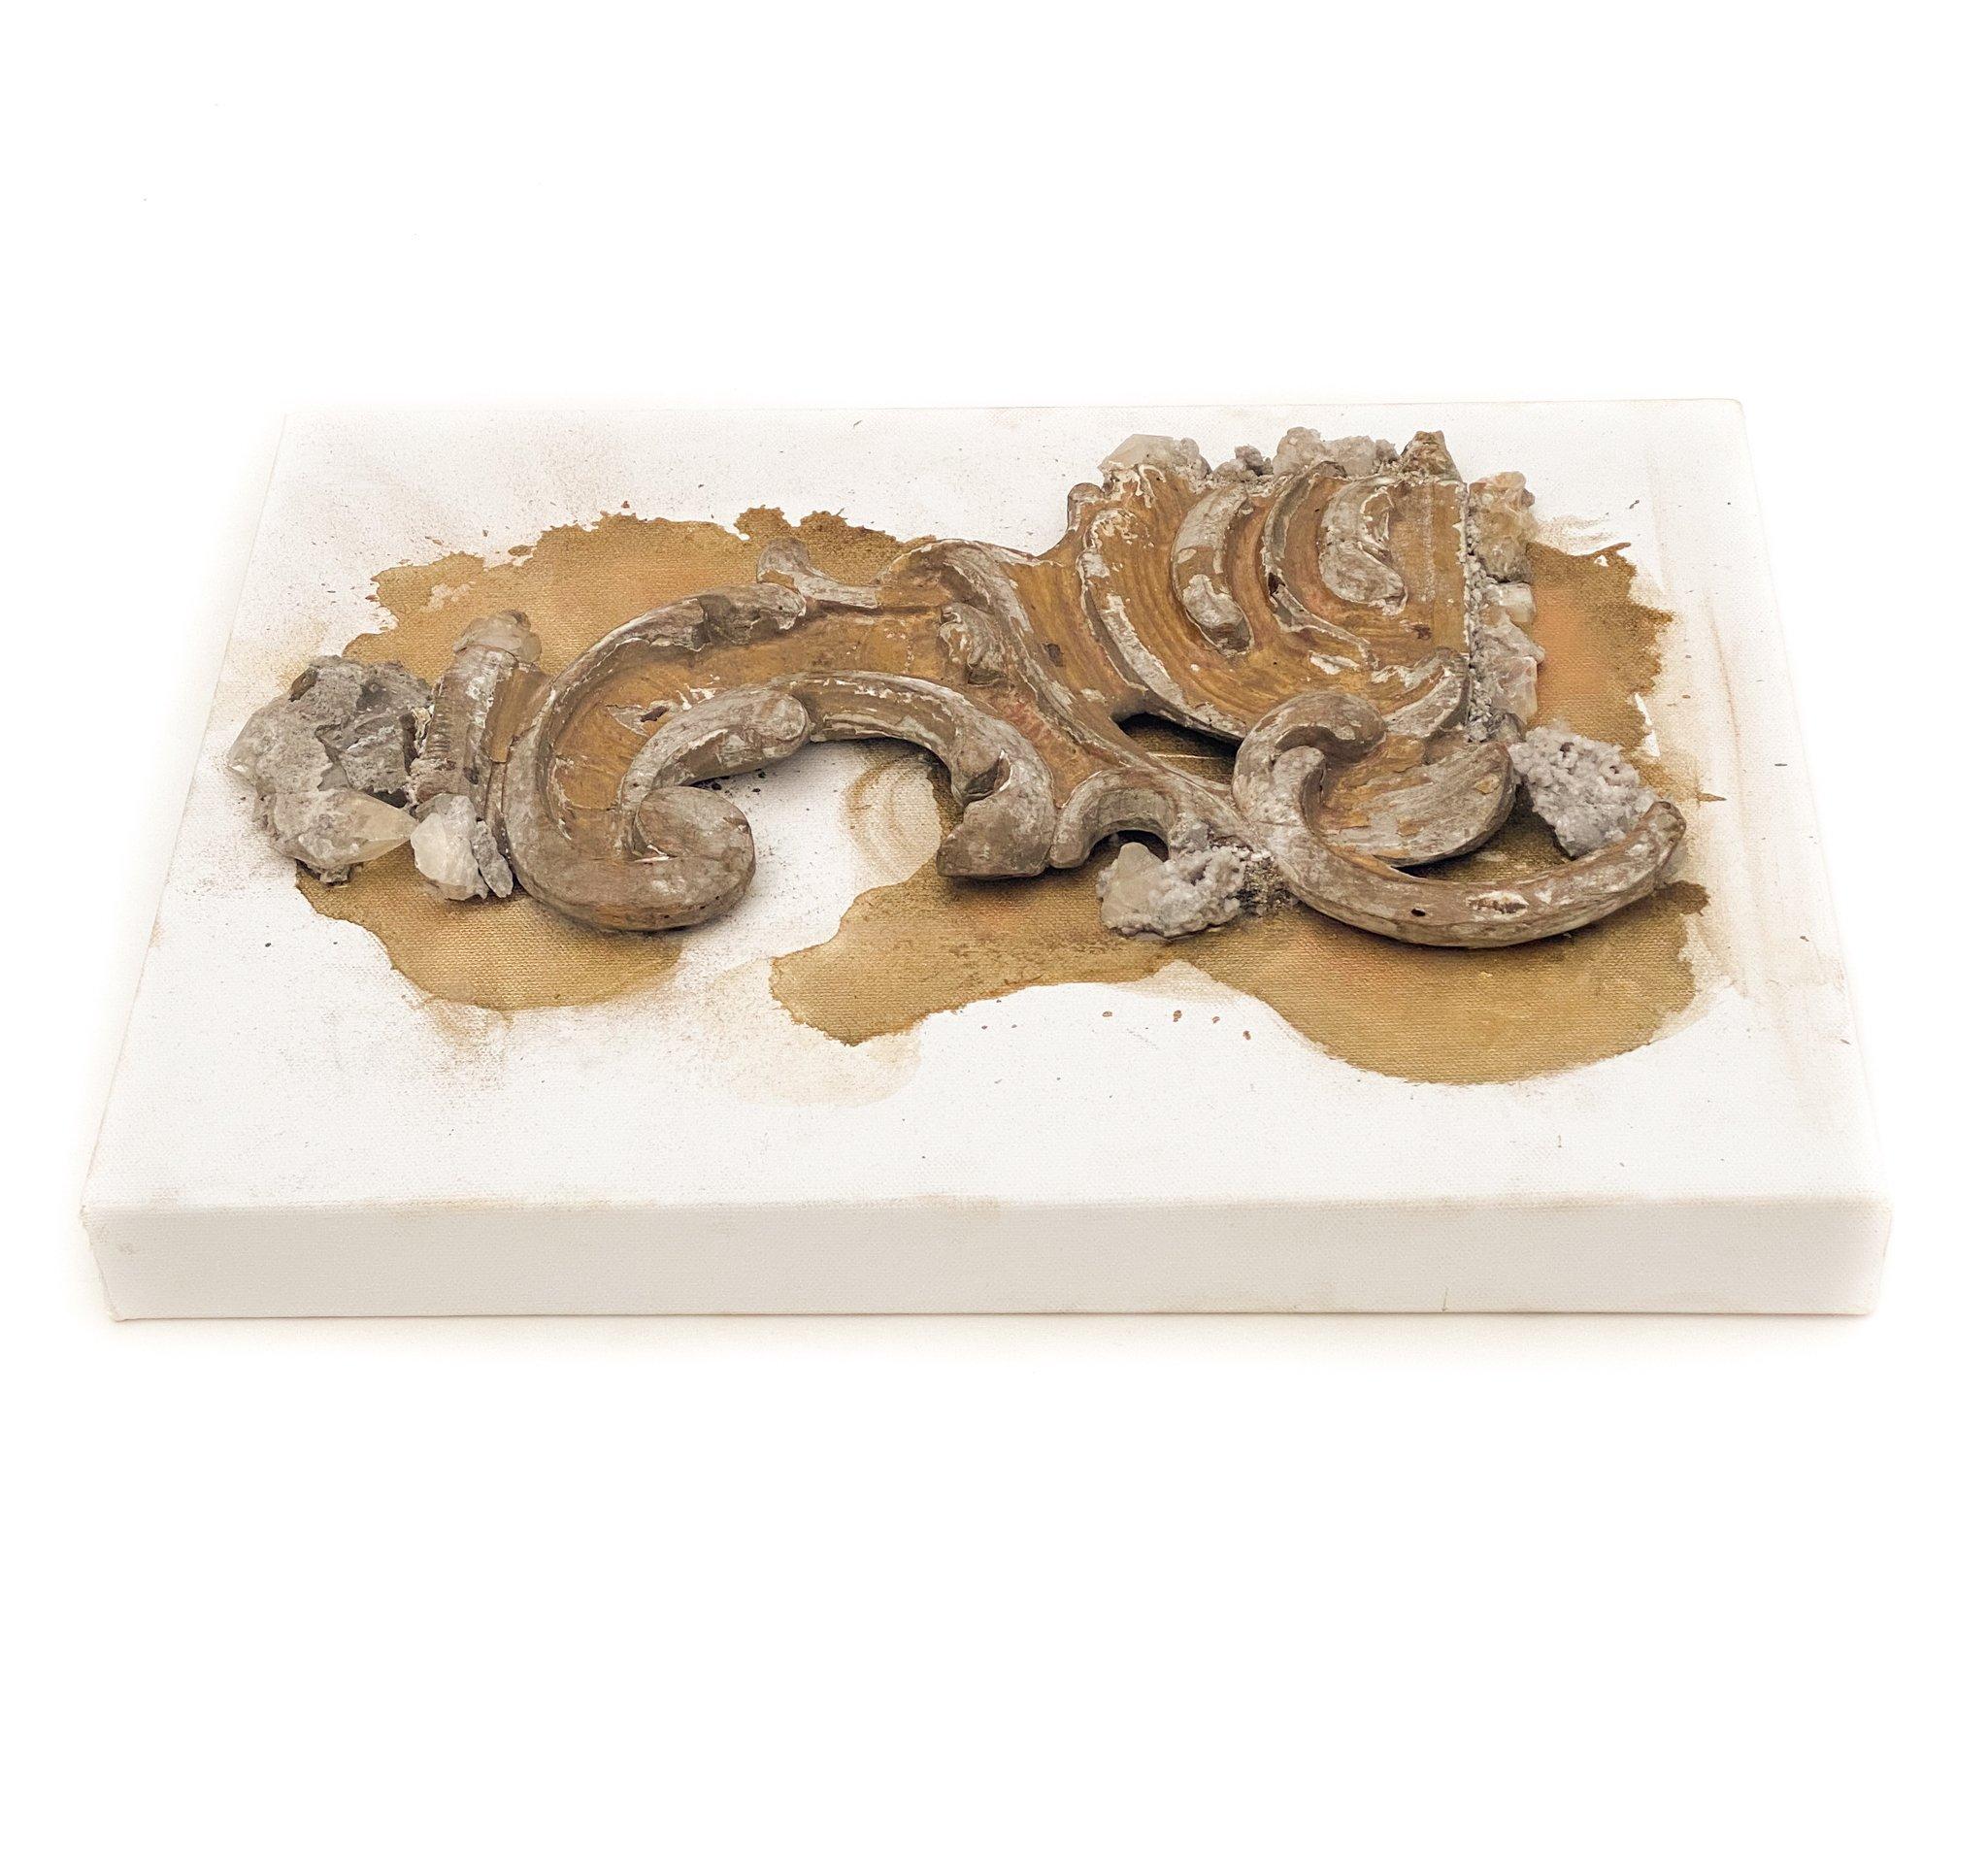 Hand-Carved 18th Century Italian Fragment and Calcite Crystal Wall-Mounted Sculpture